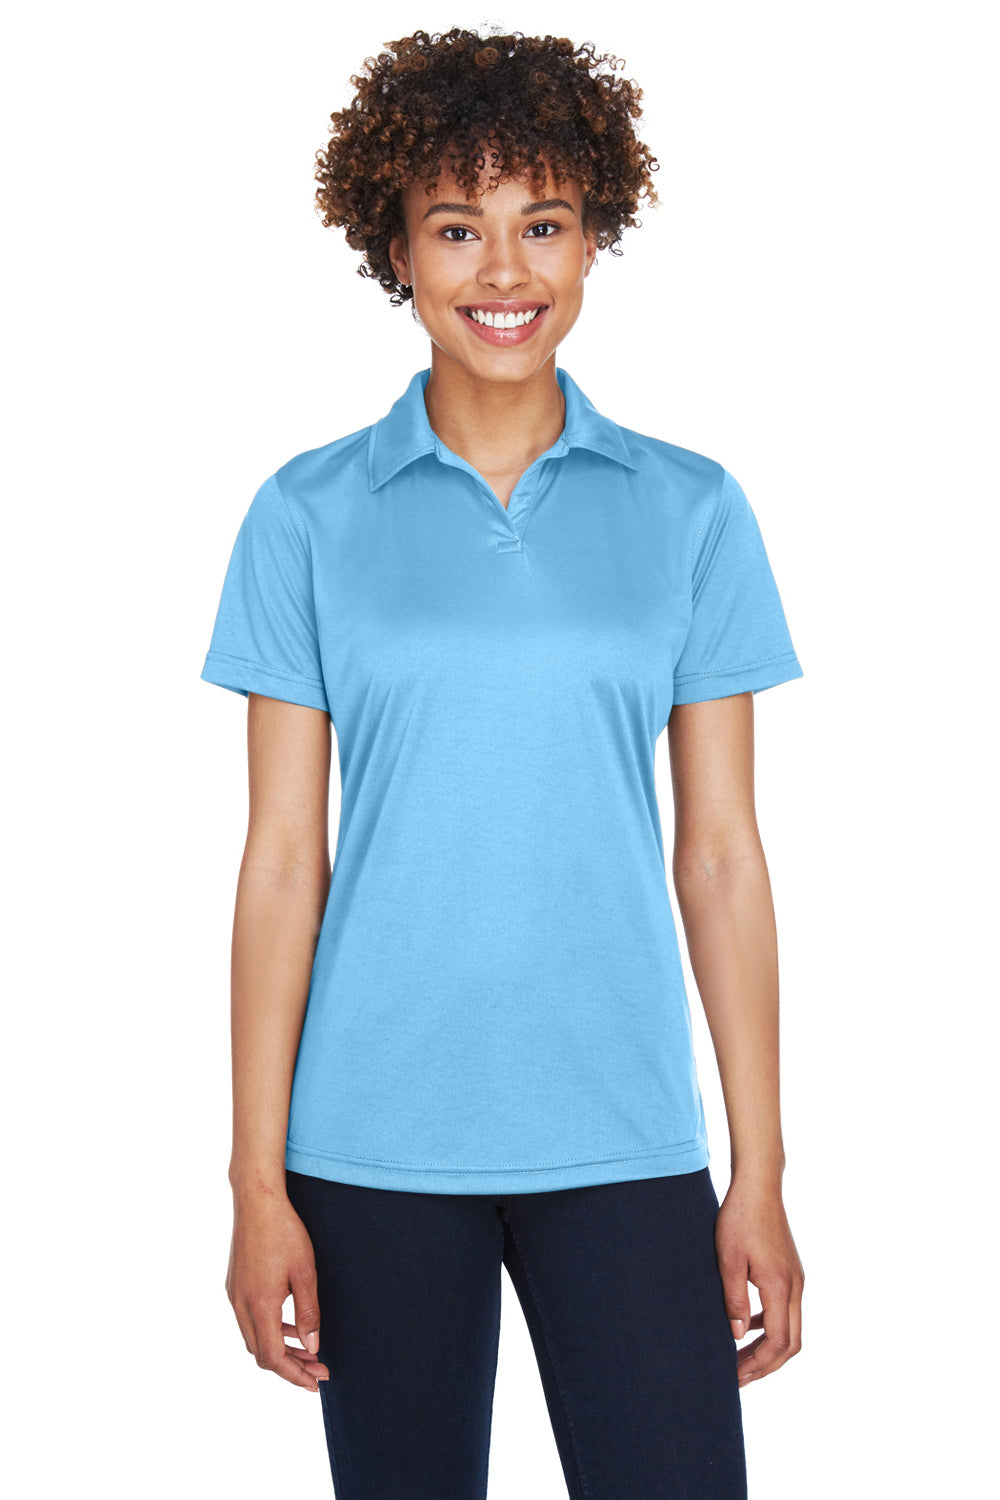 UltraClub 8425L Womens Cool & Dry Performance Moisture Wicking Short Sleeve Polo Shirt Columbia Blue Front